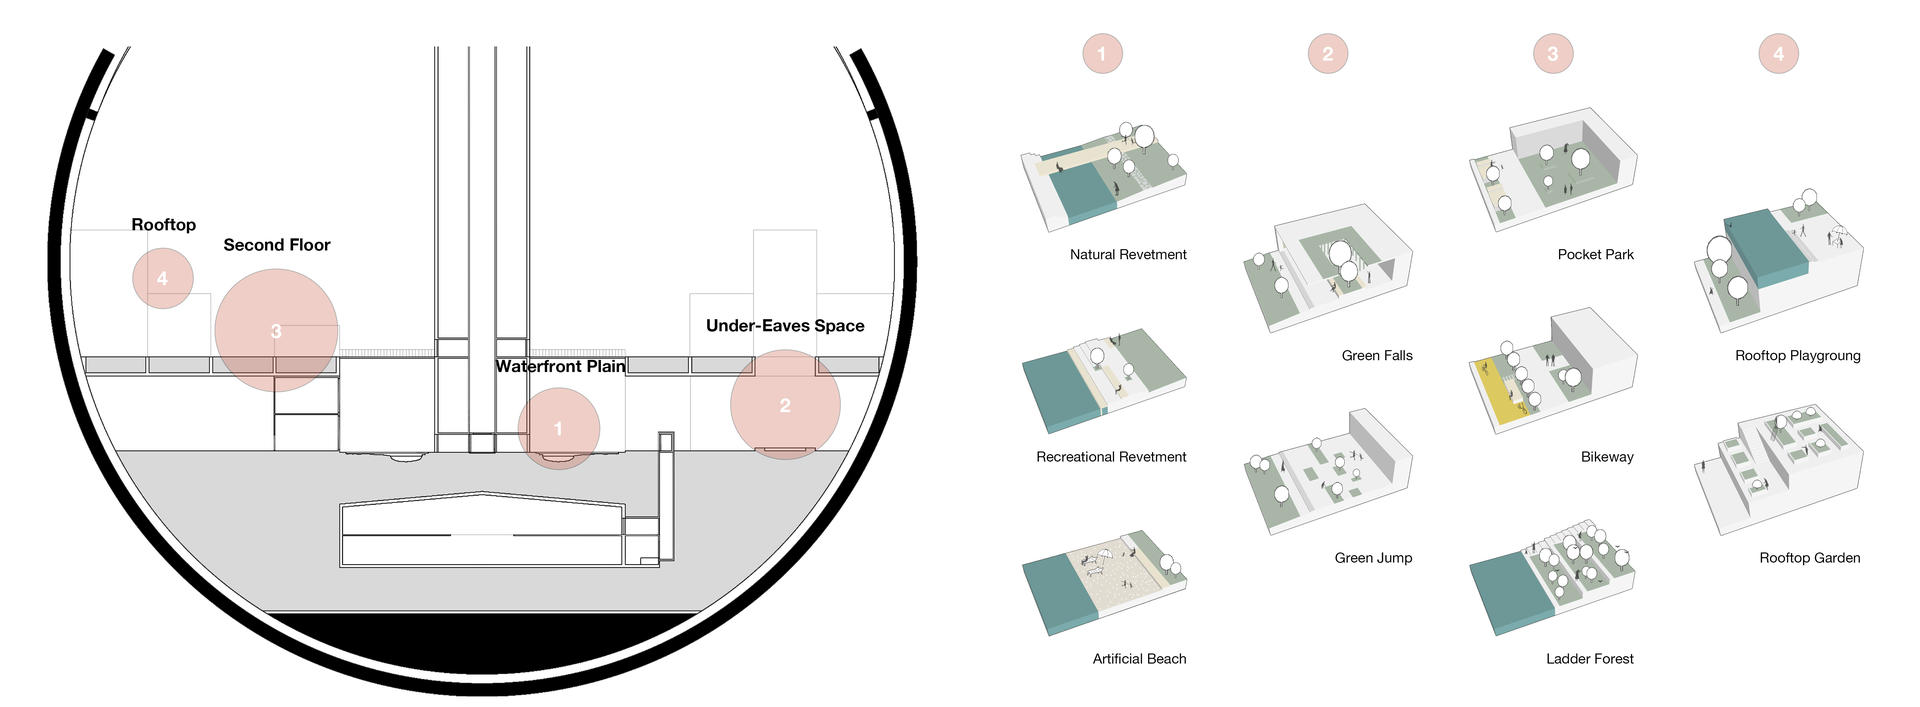 Residential area design forms